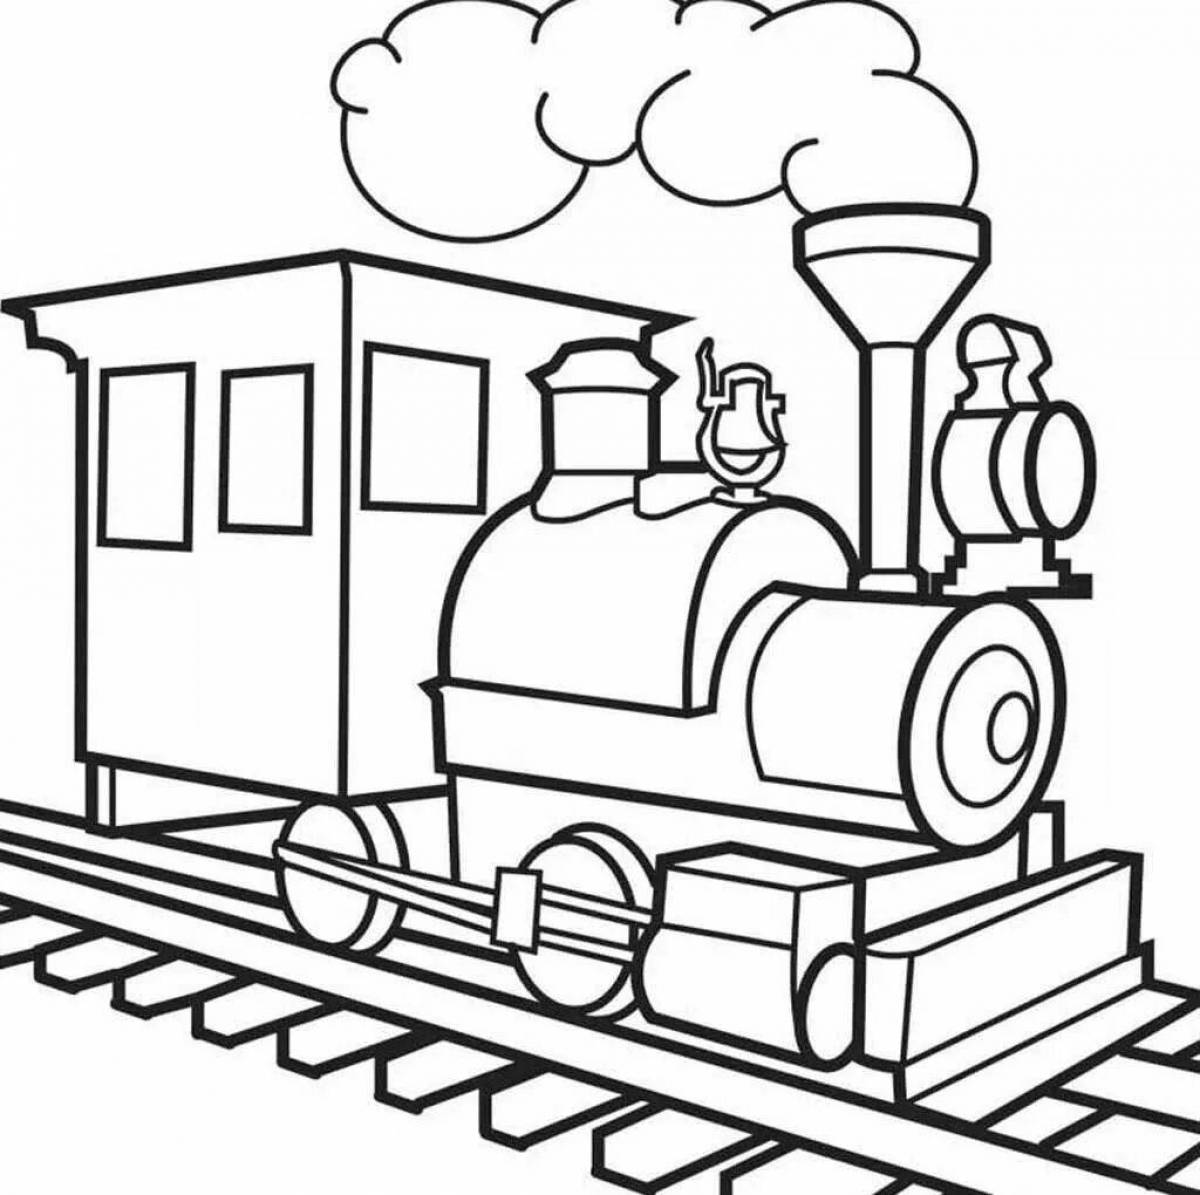 Adorable train coloring book for kids